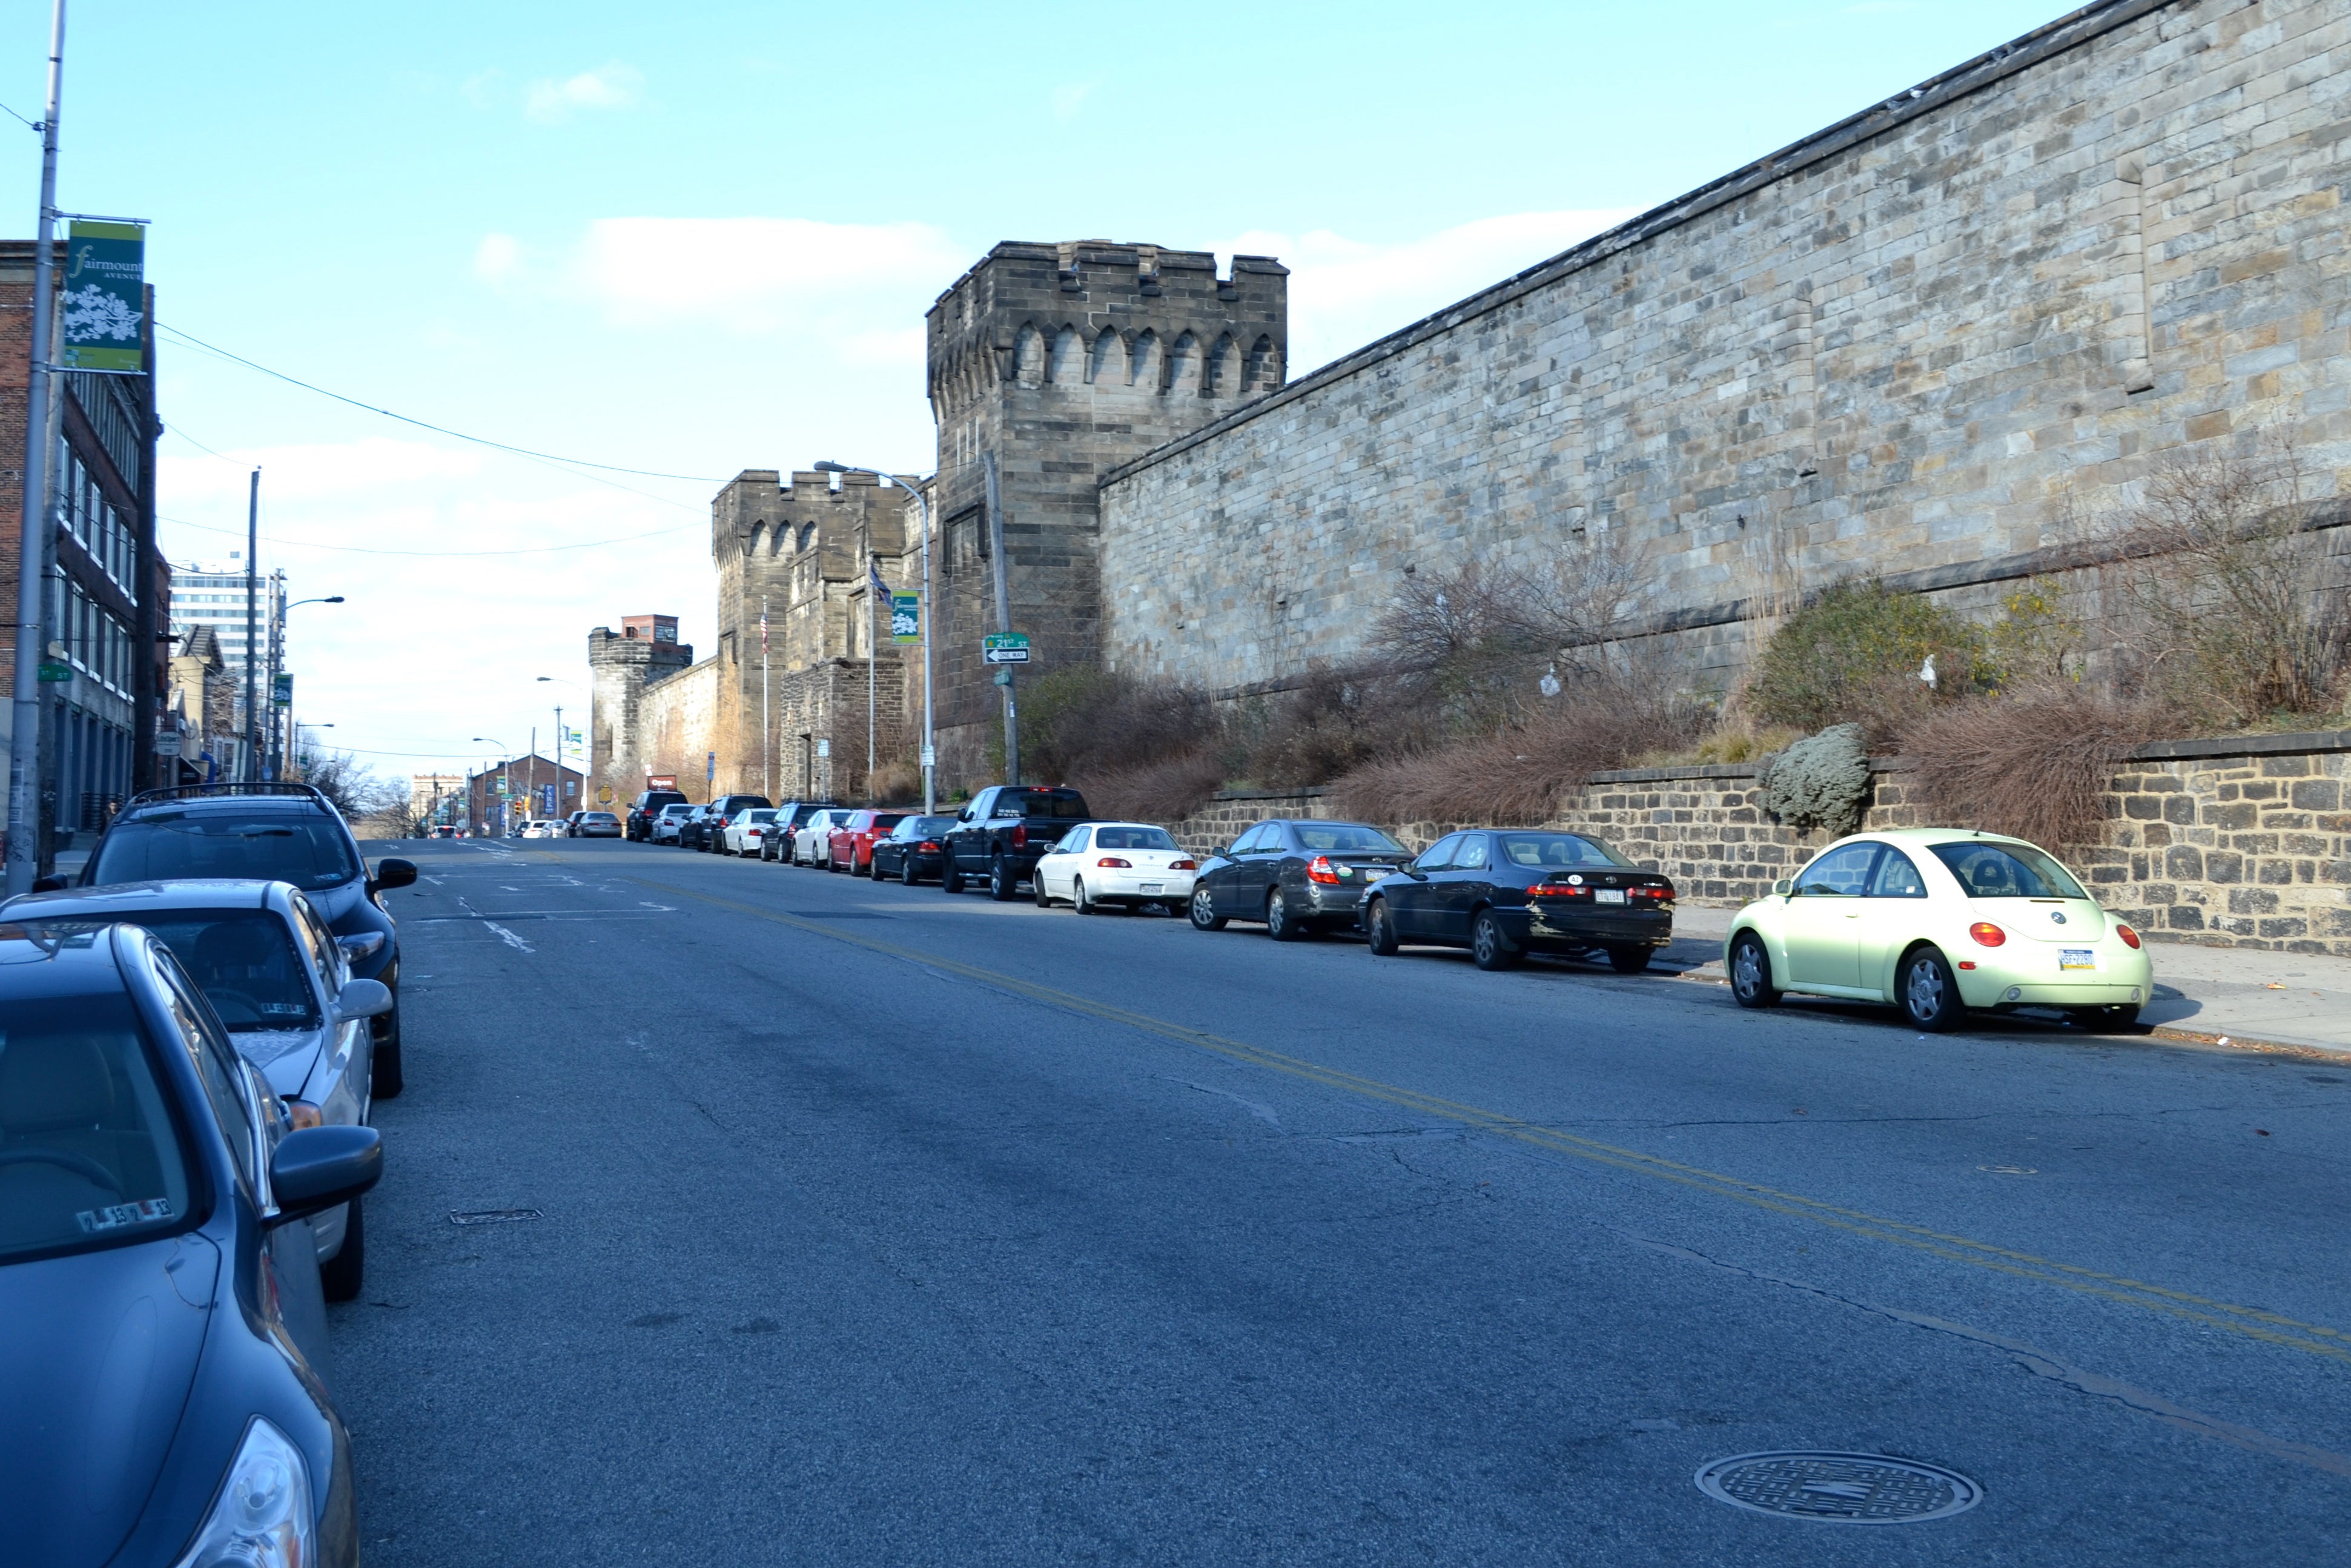 Because Fairmount Ave is 48 feet wide, no parking or travel lanes will be removed to make way for bike lanes